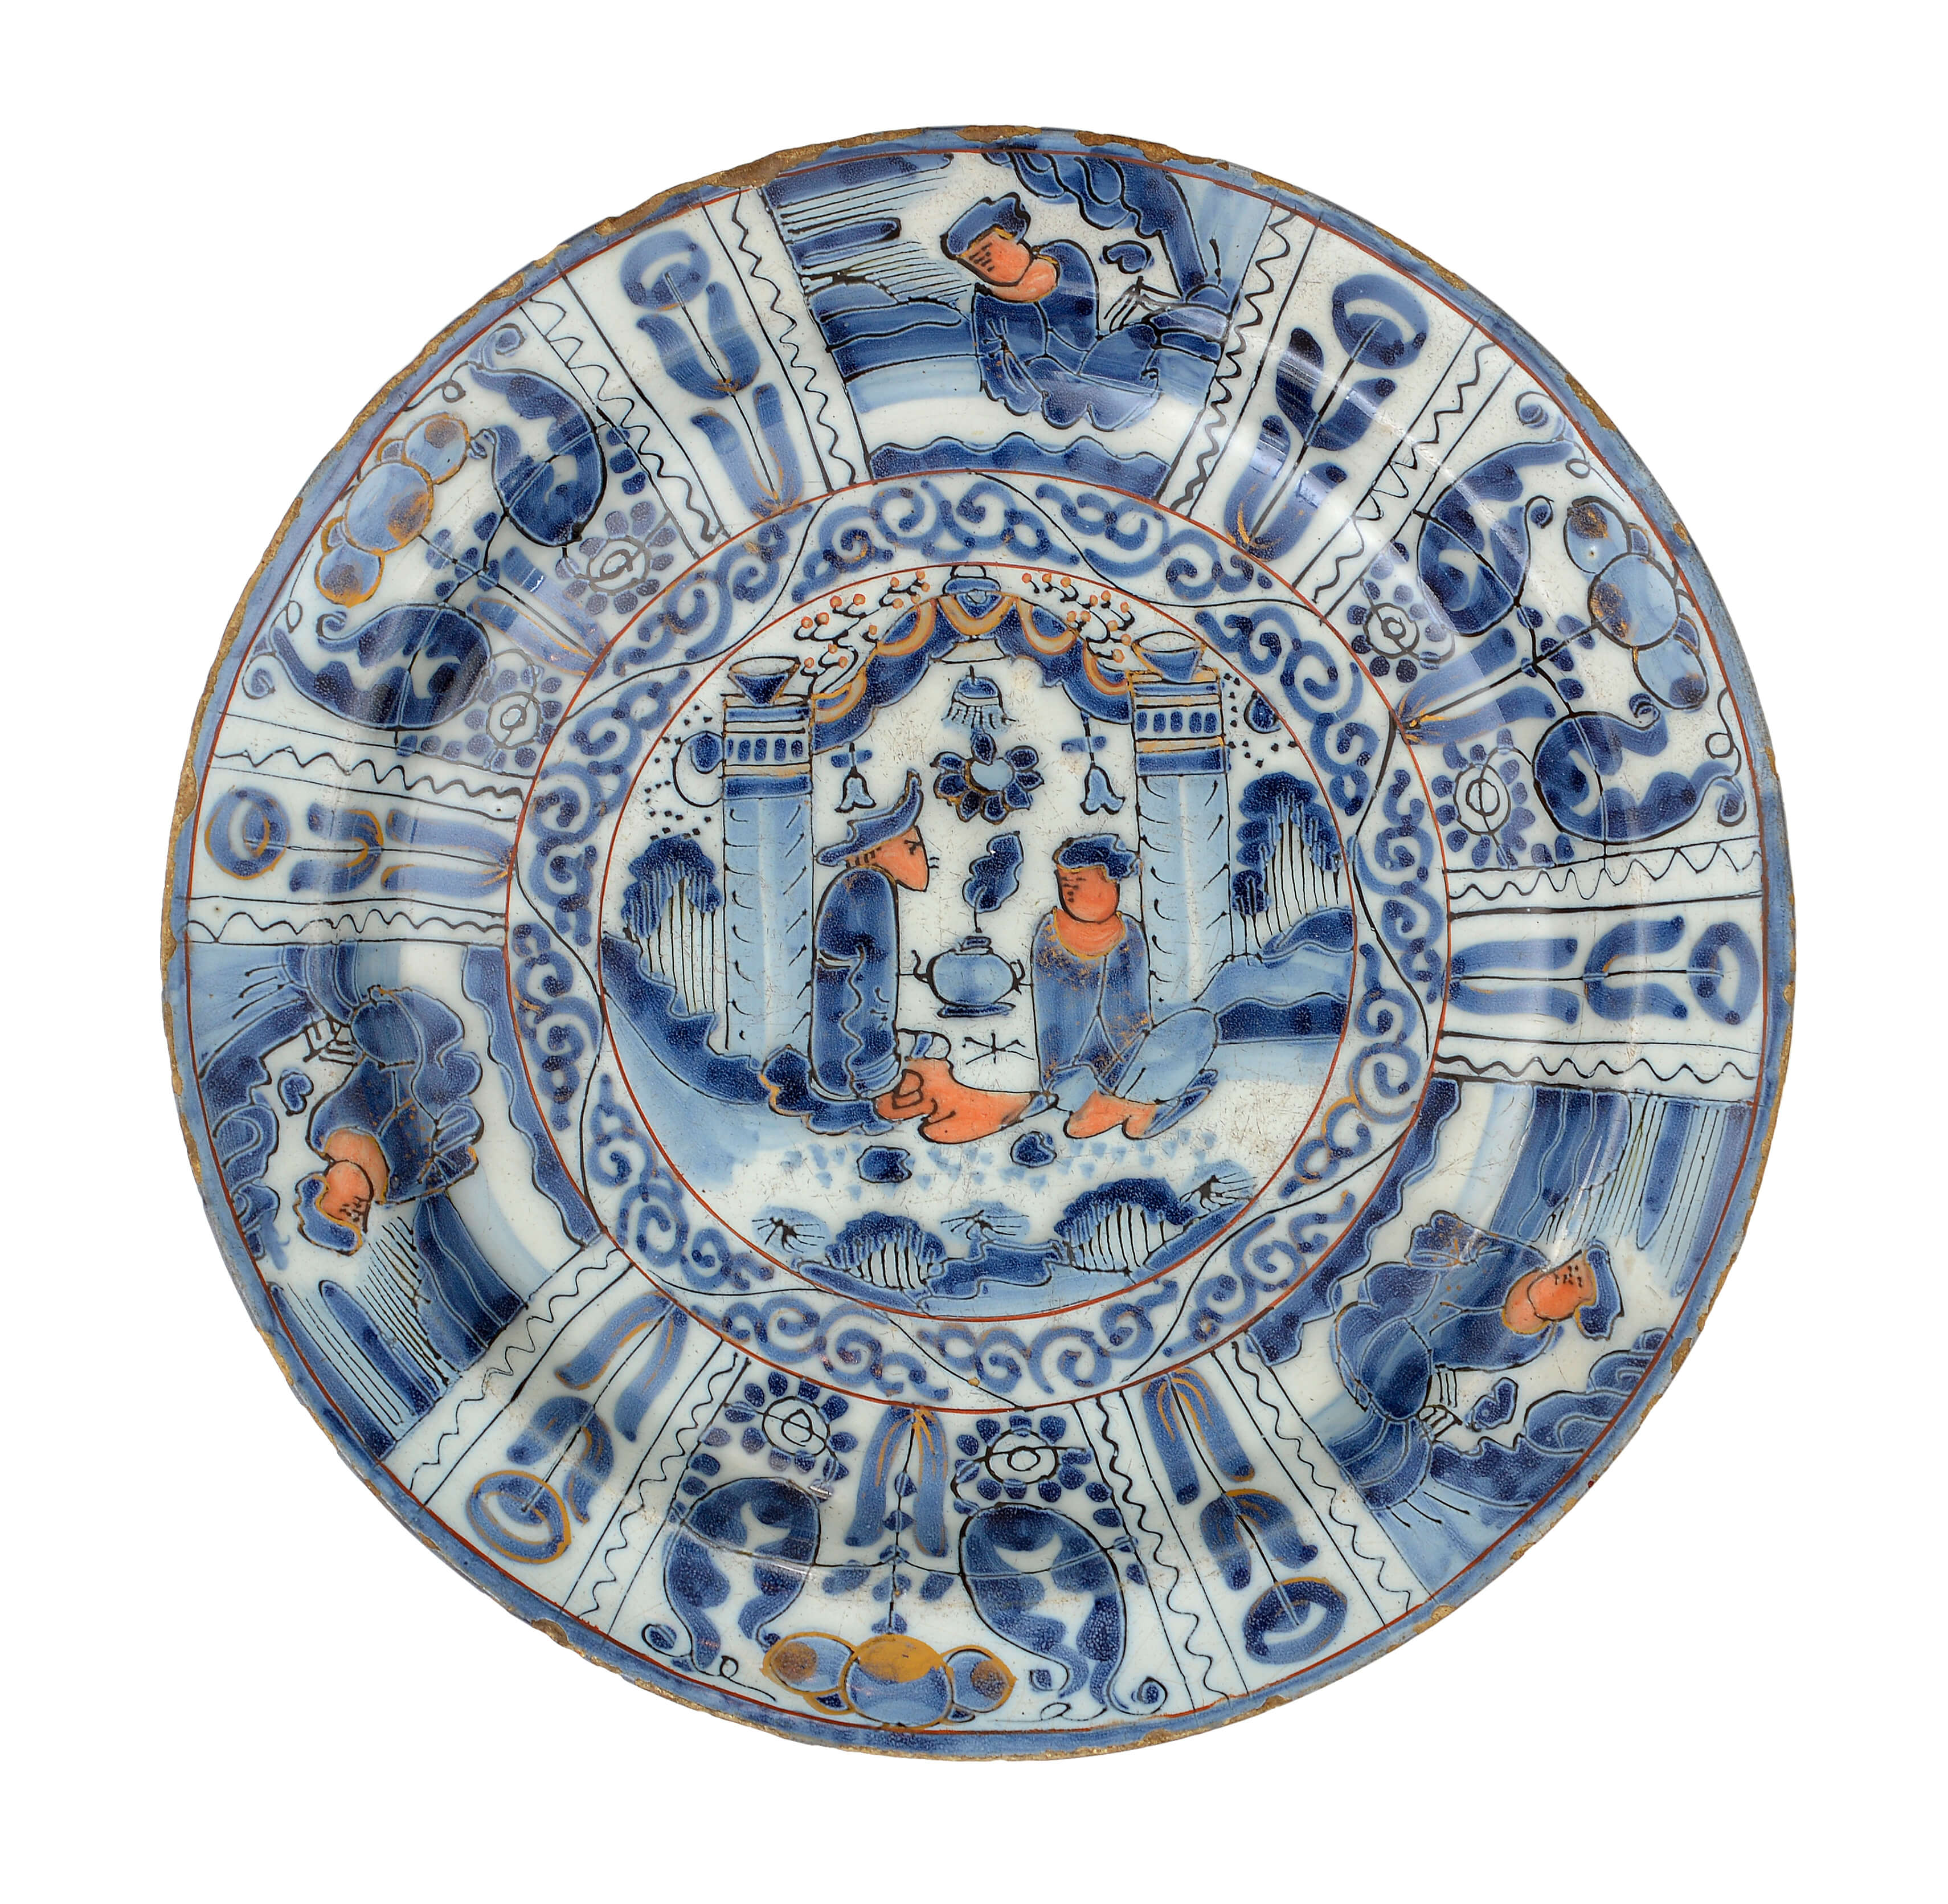 Gilde Kraak Style antique plate in Polychrome colors